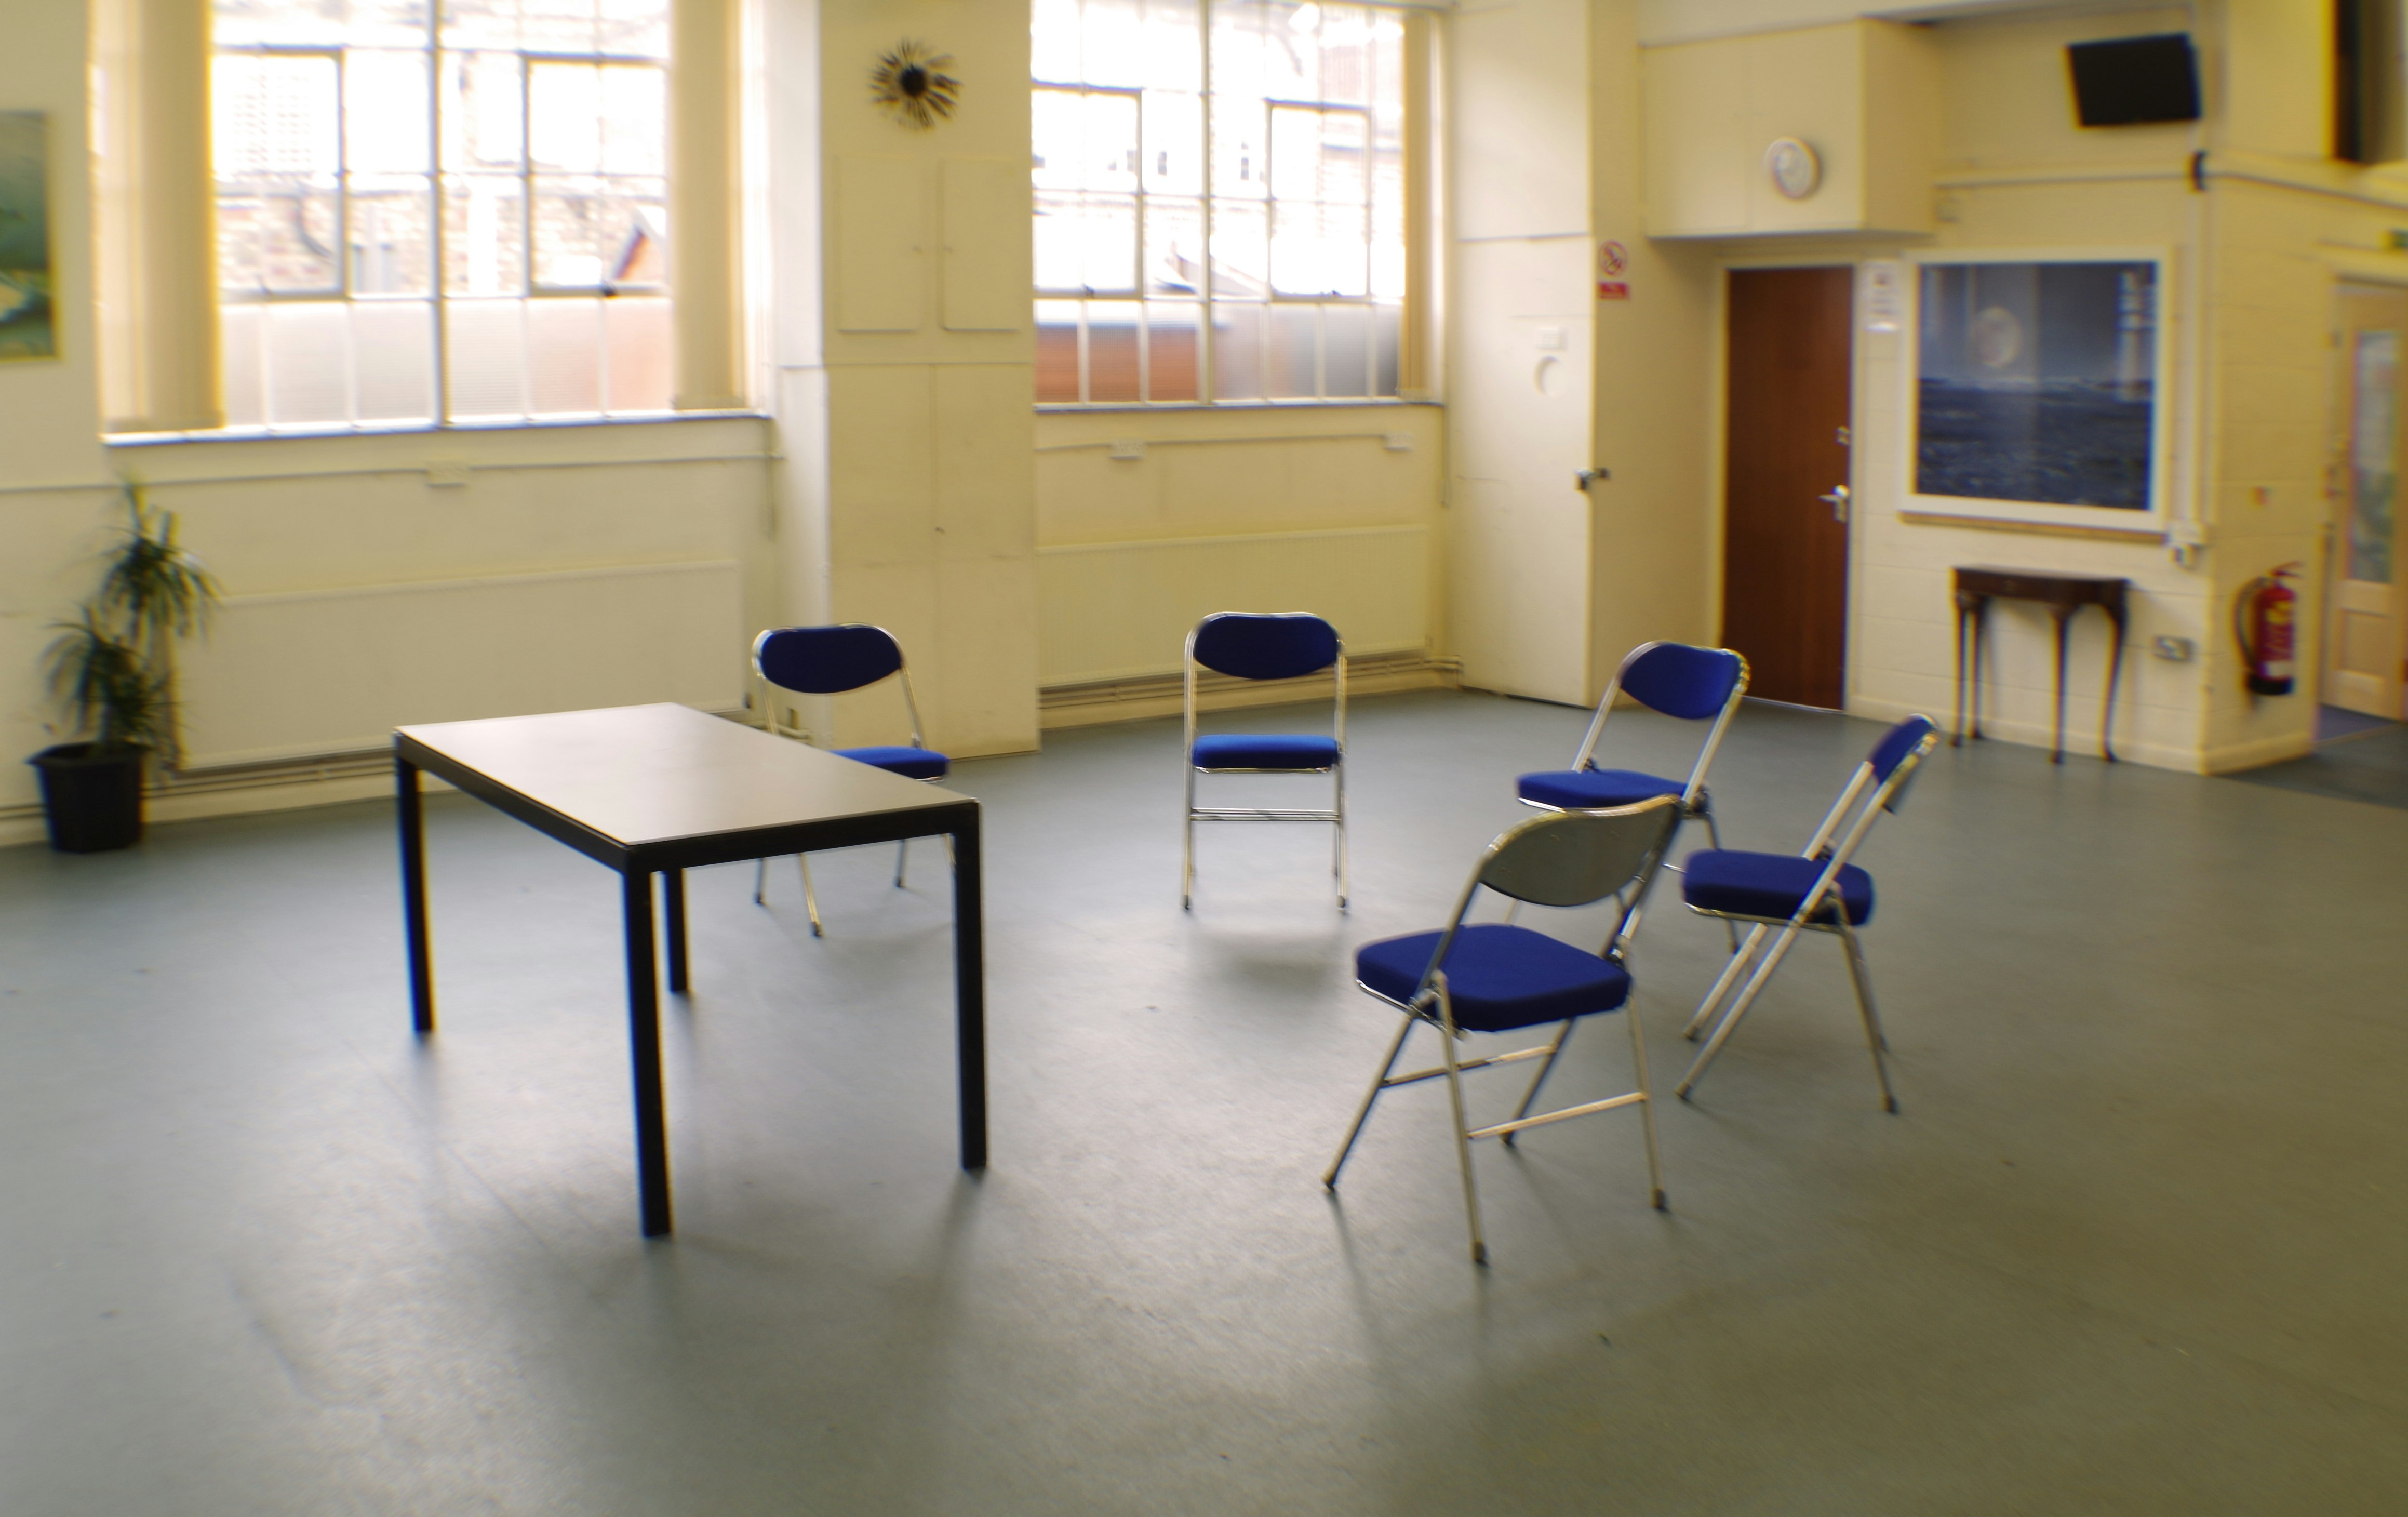 Audition Venues in London - Larches Community Hall